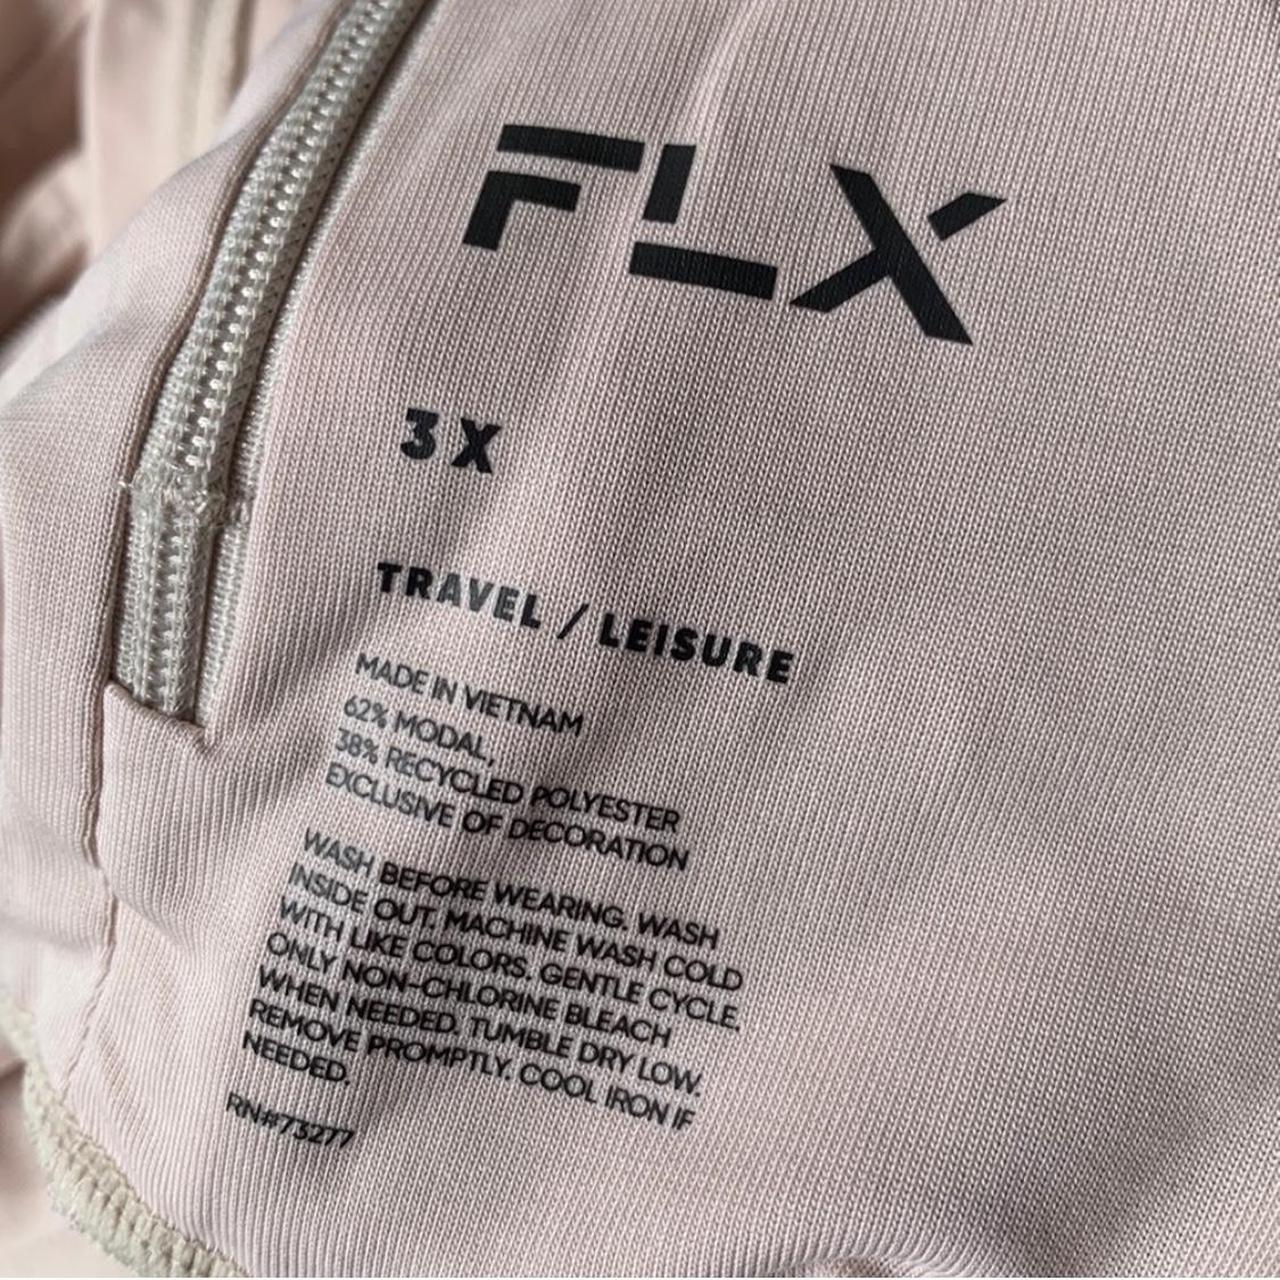 FLX Activewear - Clothing (Brand)